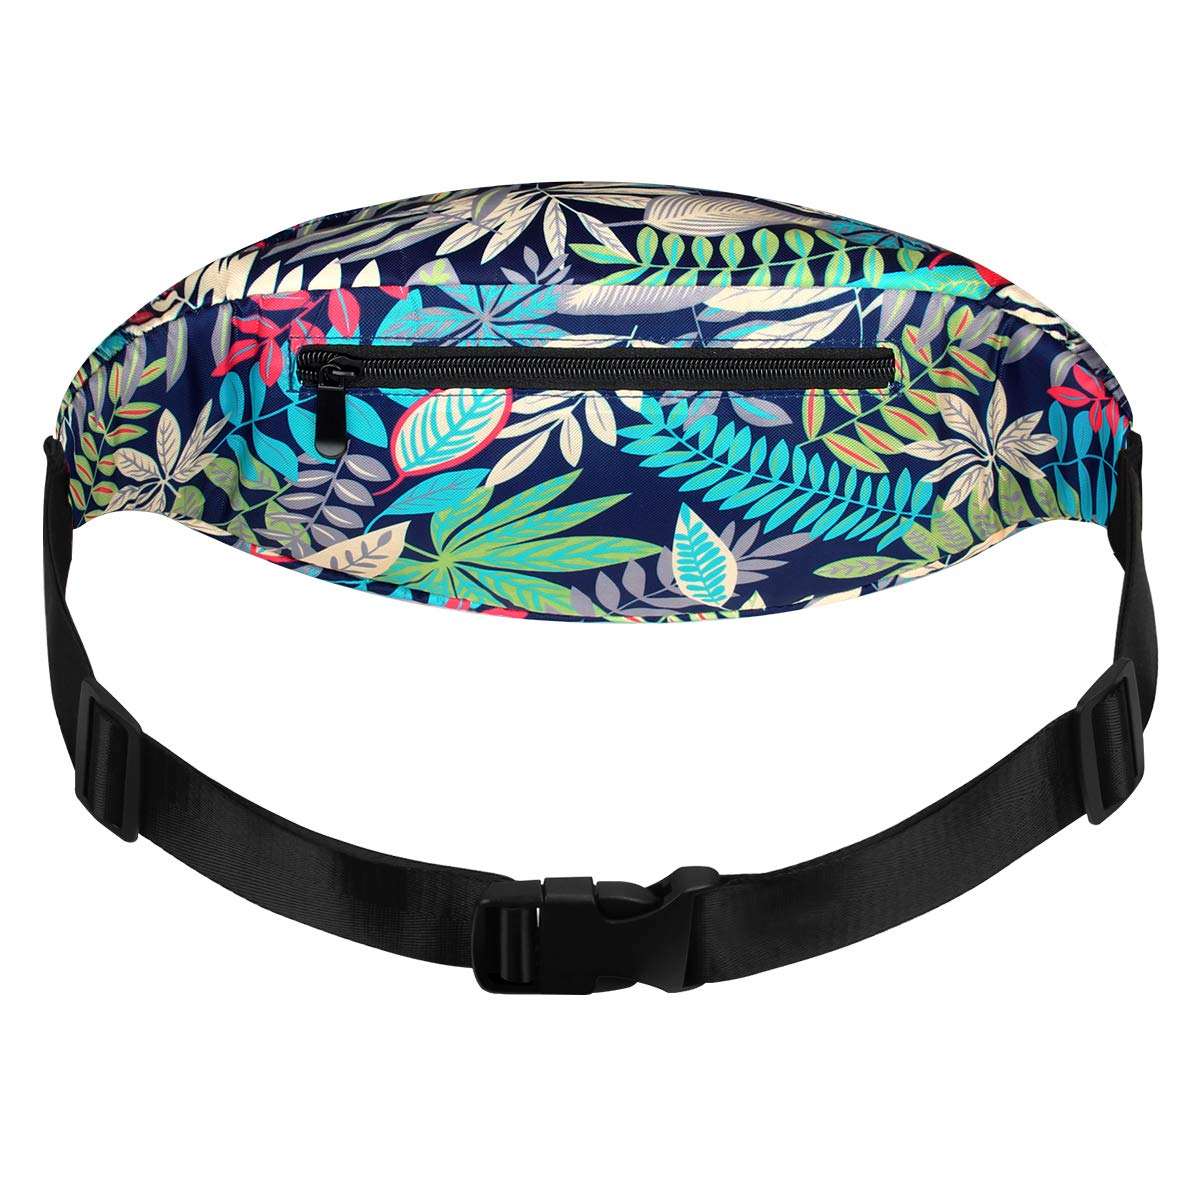 Fashion Beach style Travel Fanny pack Super Lightweight For Travel Waist Pack